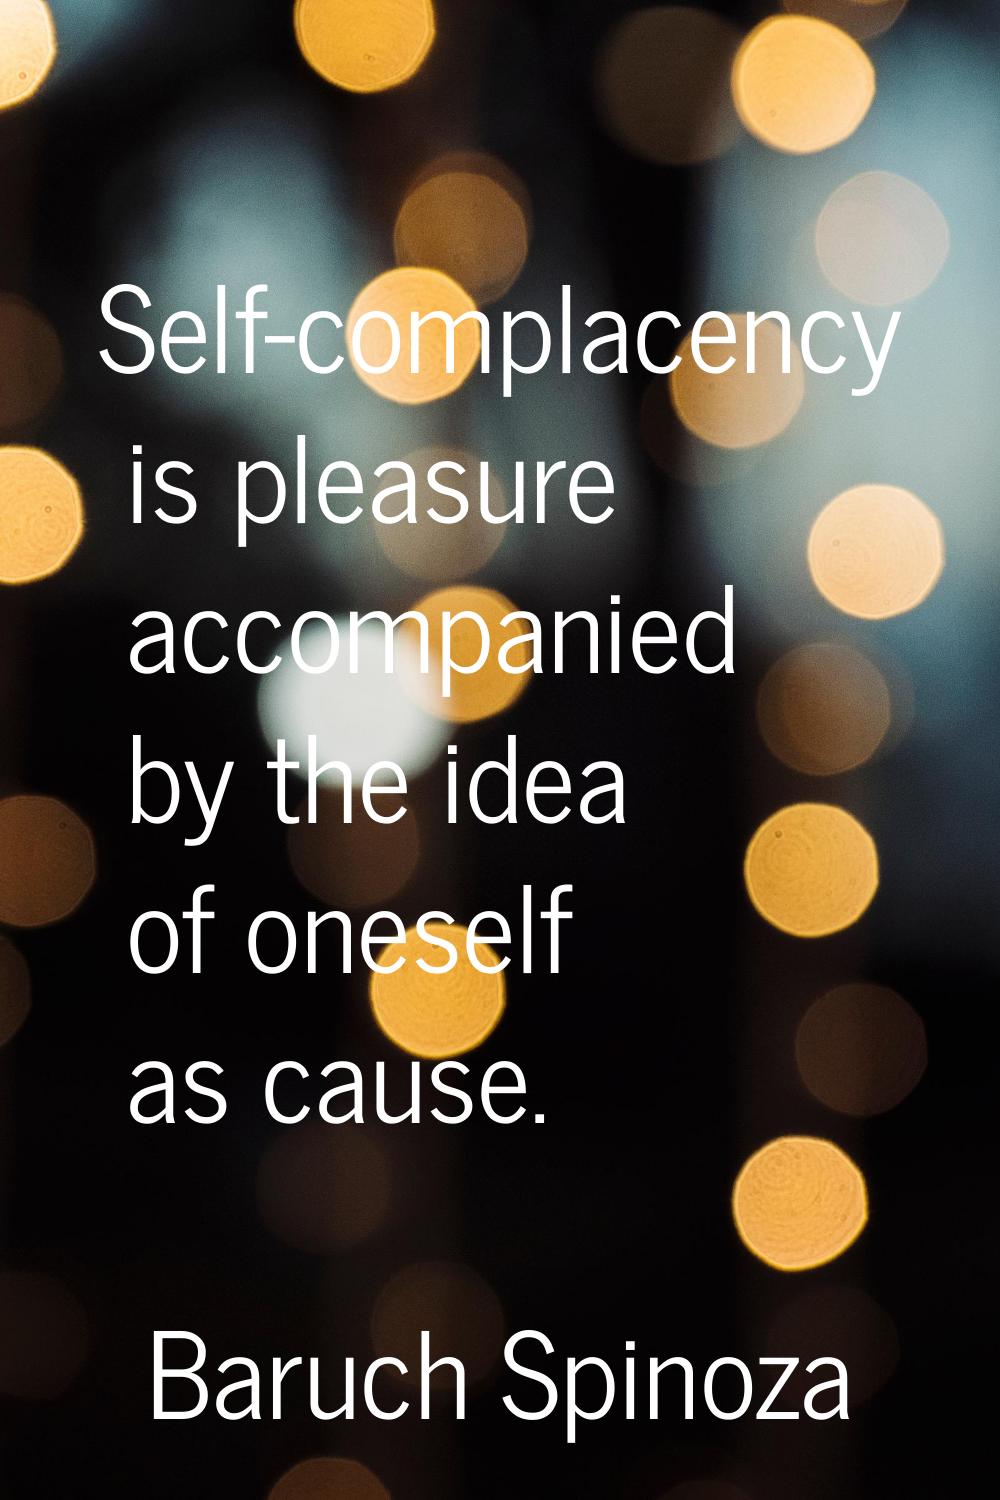 Self-complacency is pleasure accompanied by the idea of oneself as cause.